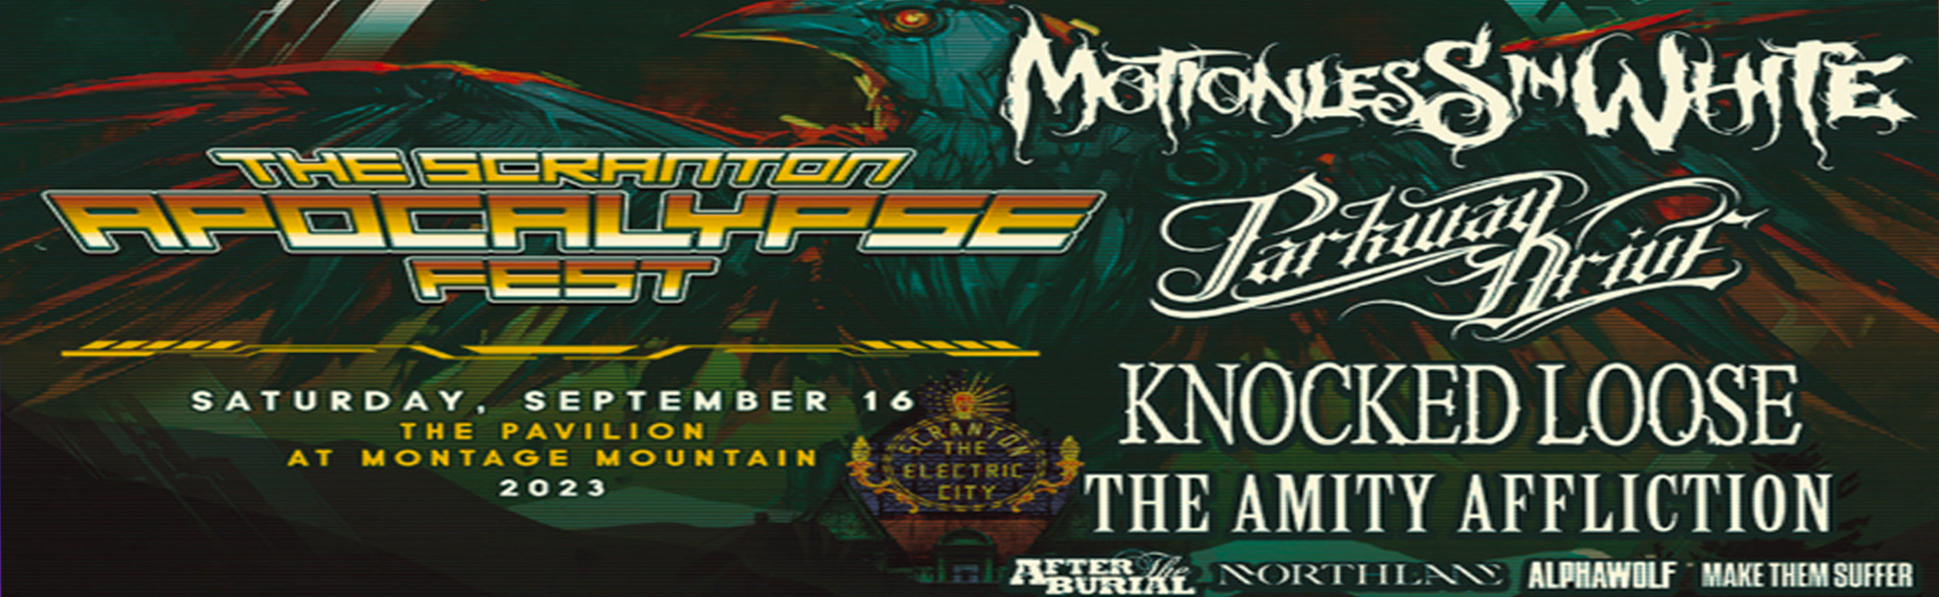 Scranton Apocalypse: Motionless In White, Parkway Drive, Knocked Loose & The Amity Affliction at Pavilion at Montage Mountain